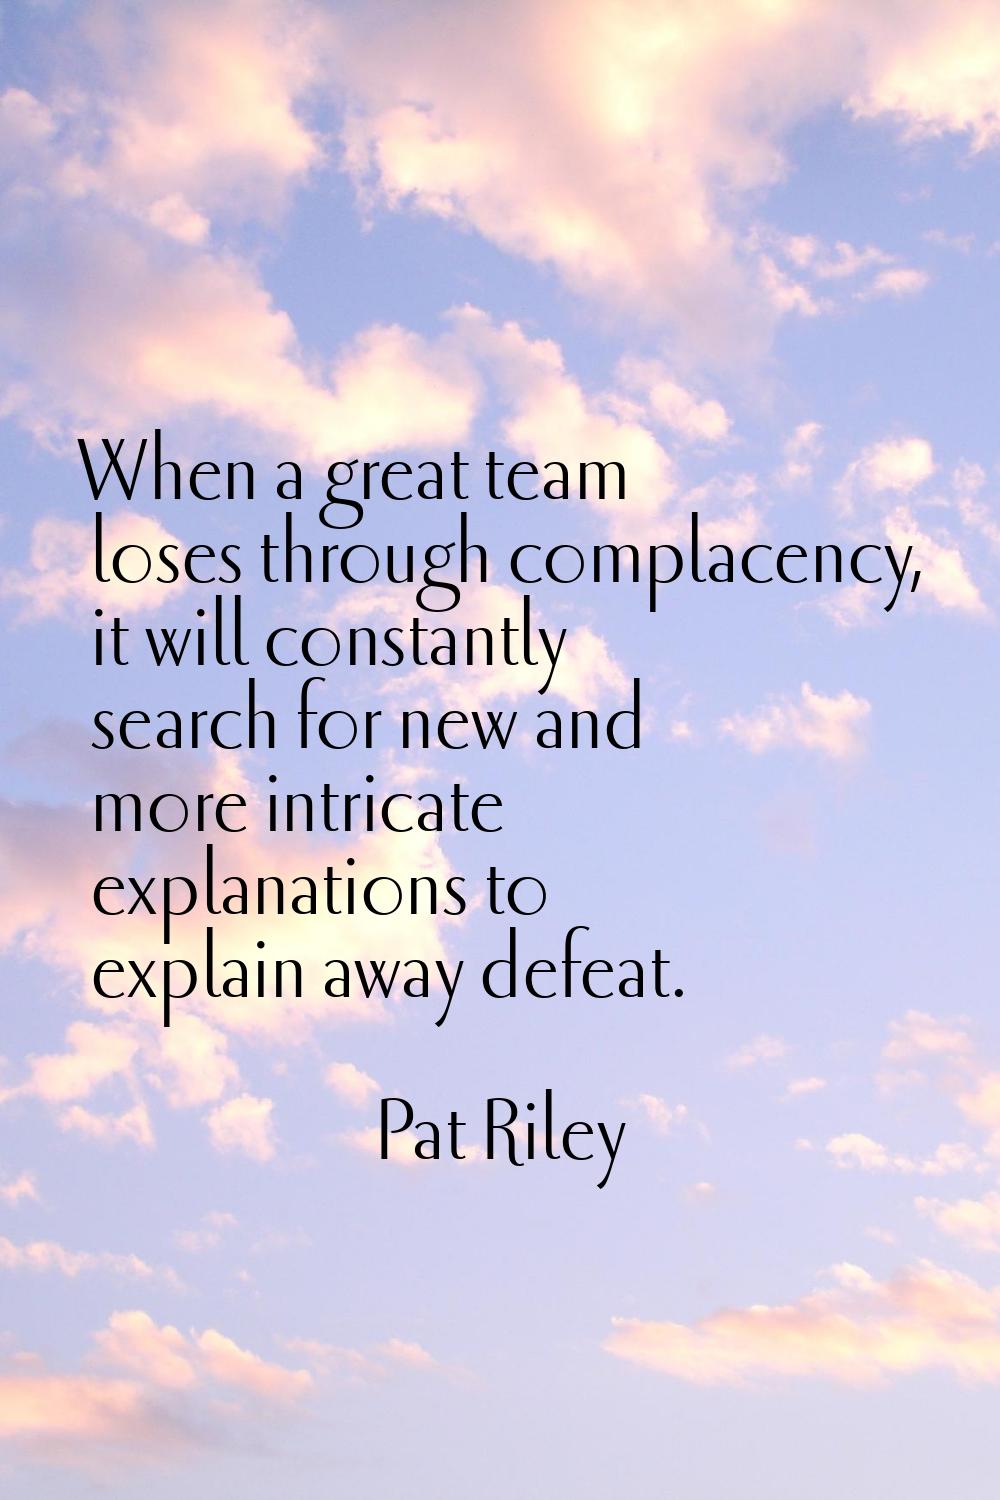 When a great team loses through complacency, it will constantly search for new and more intricate e